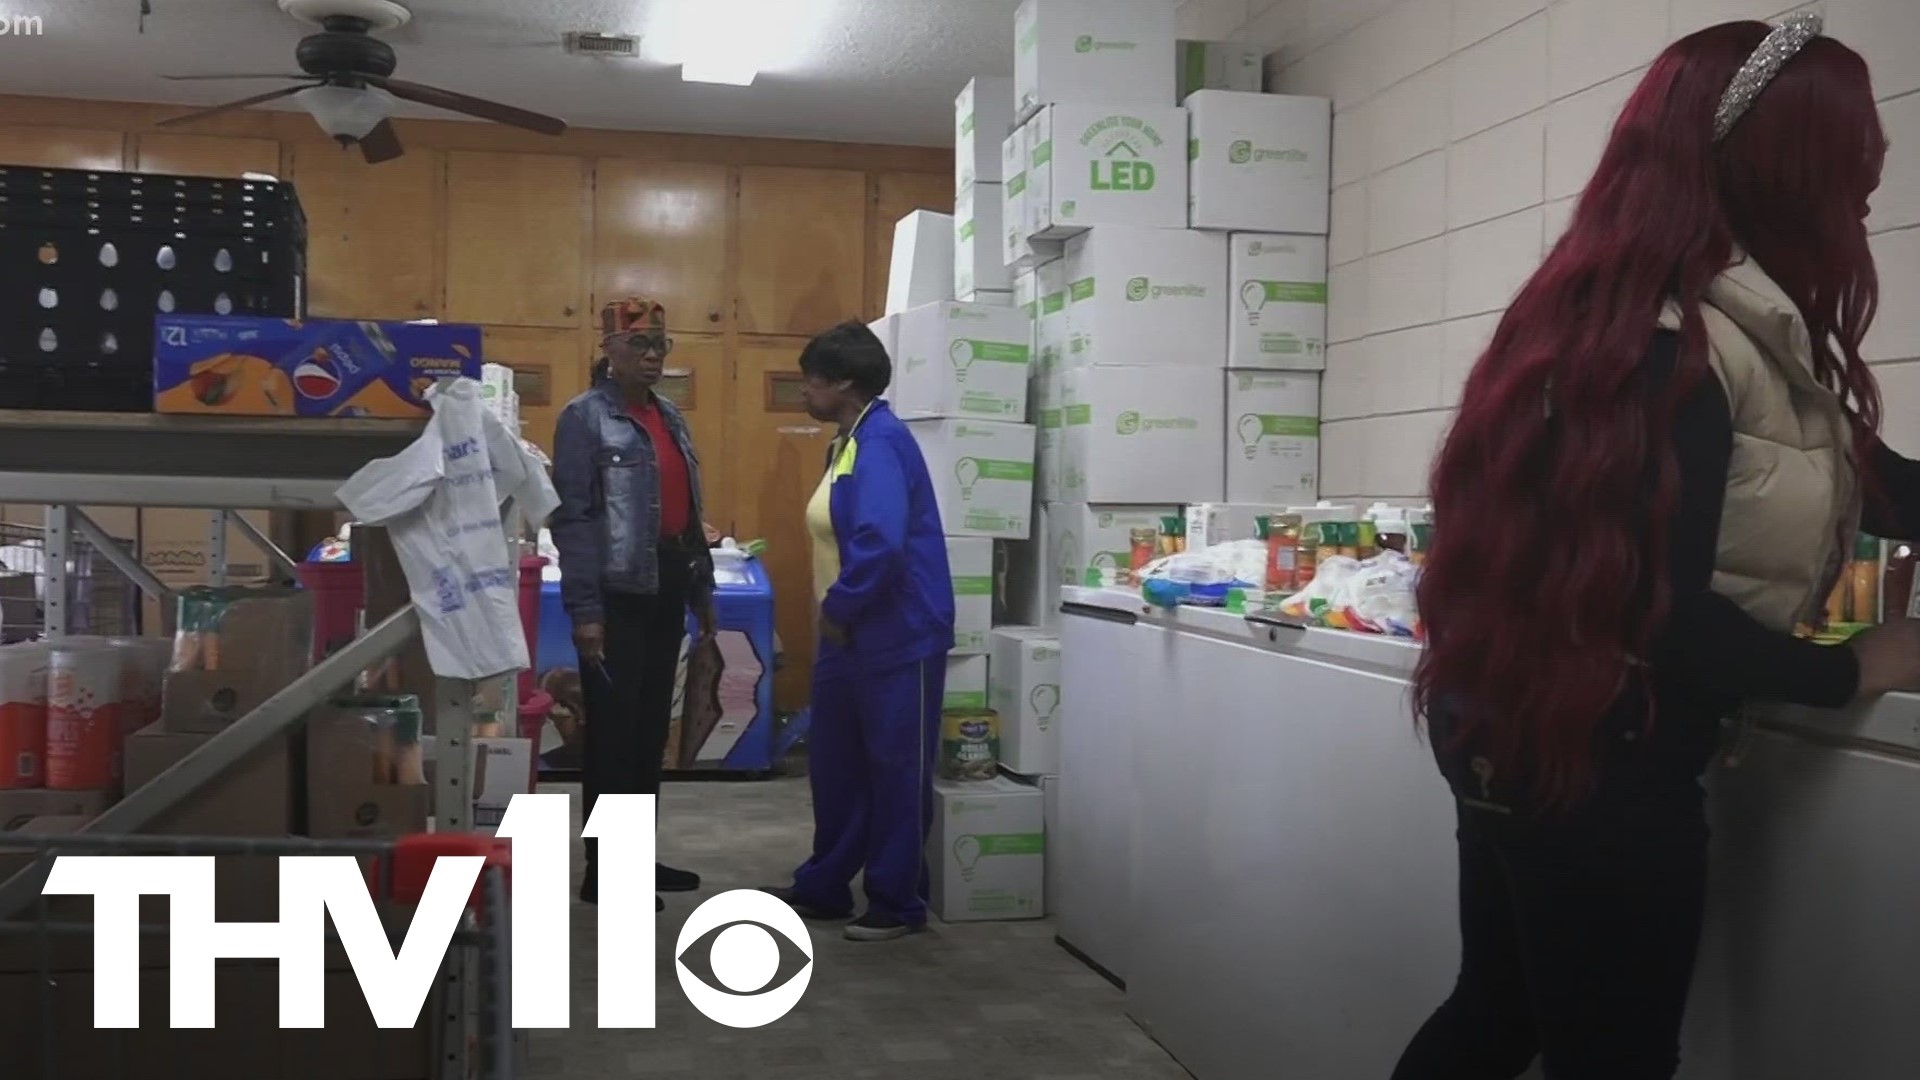 Wednesday was a big day for people in Pine Bluff after the First Ward Living Grace food pantry gave away over 40,000 pounds of groceries to people in need.